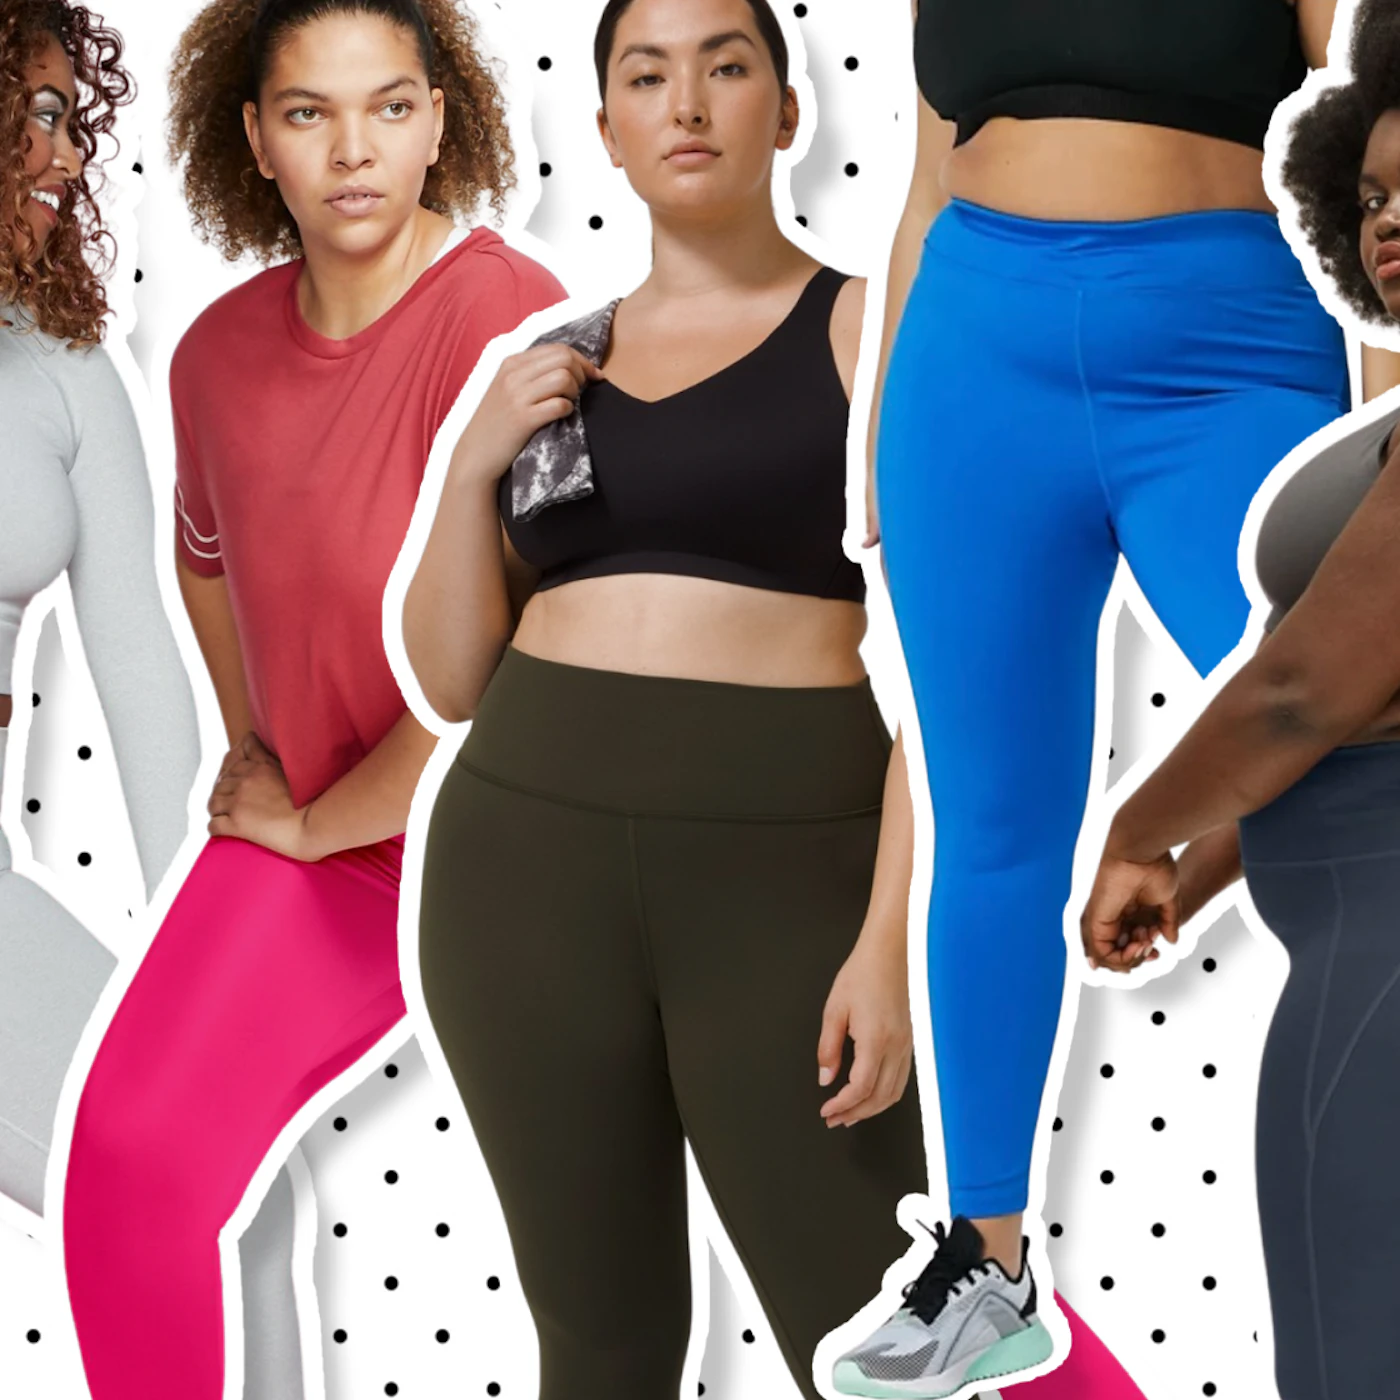 Squat-proof leggings: 7 of the best non-see through tights